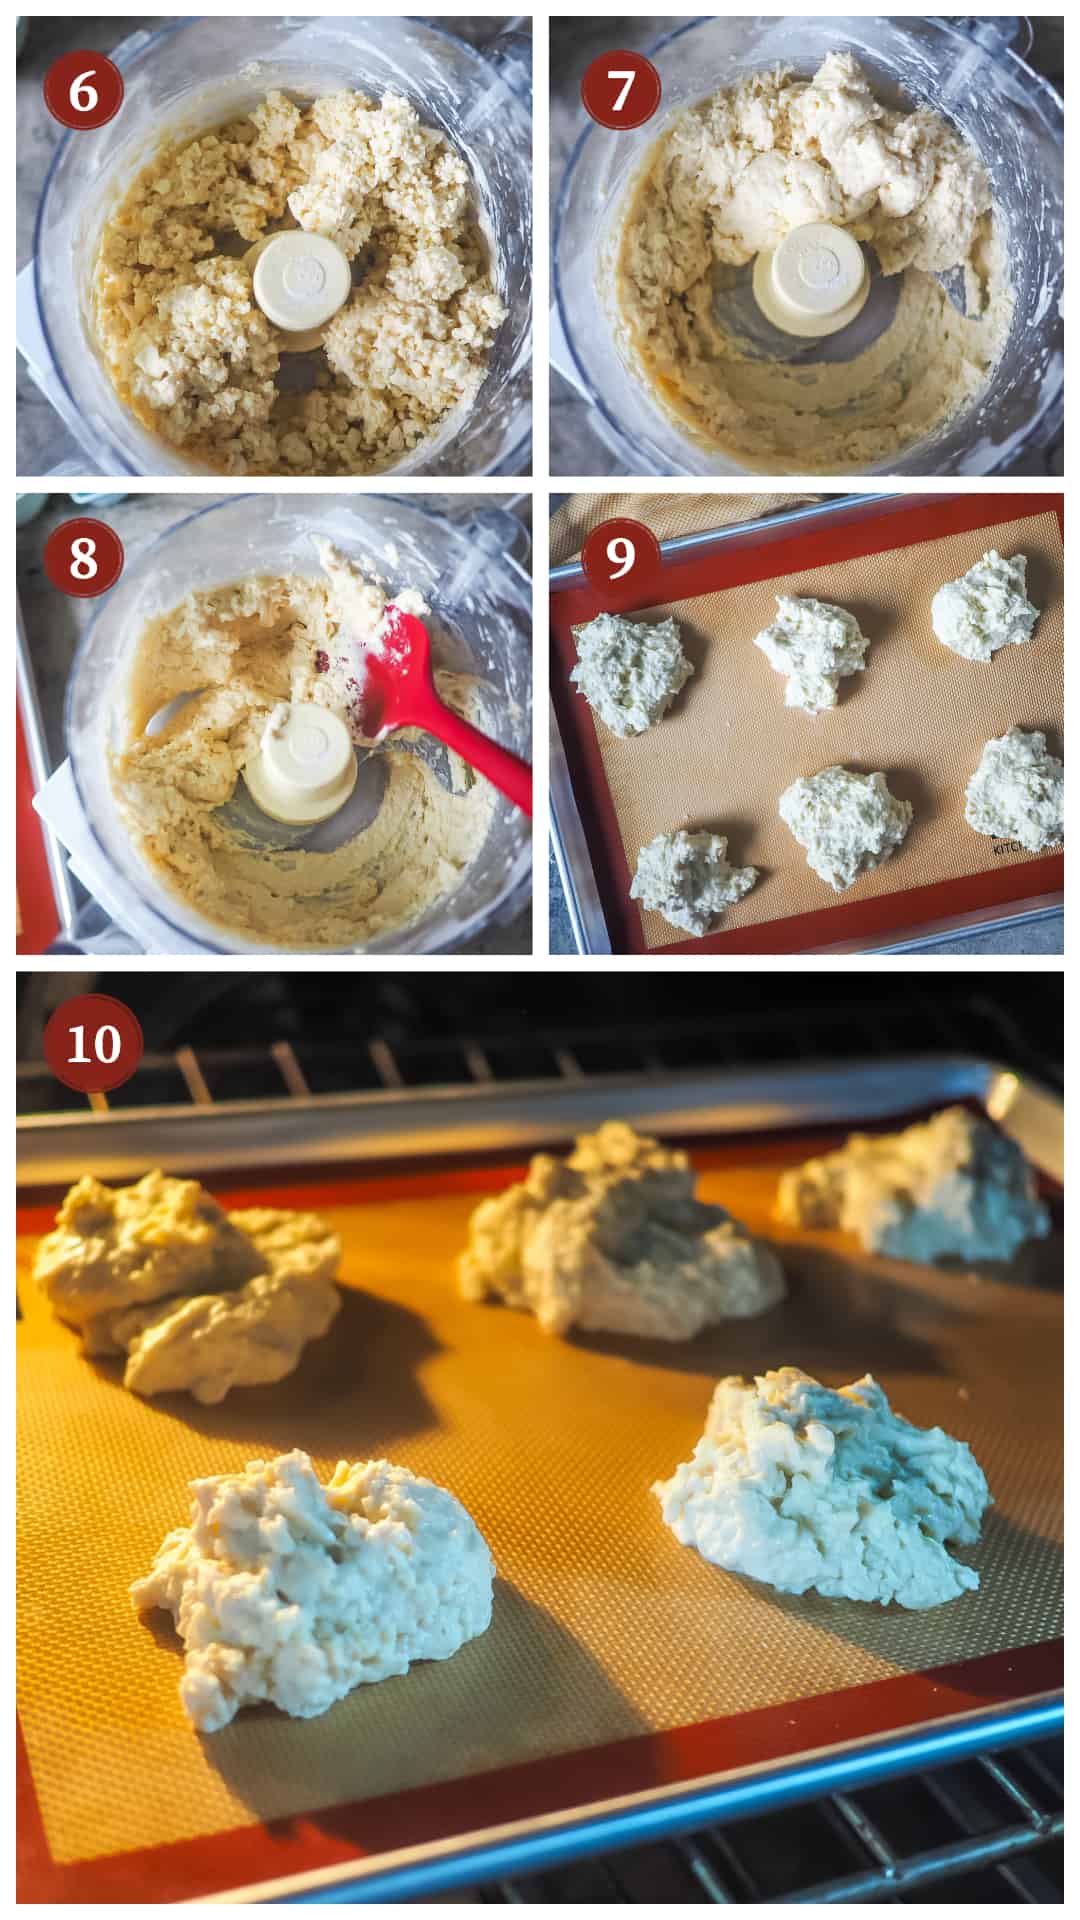 A collage of images showing the process of making drop biscuits in a food processor, steps 6 - 10.